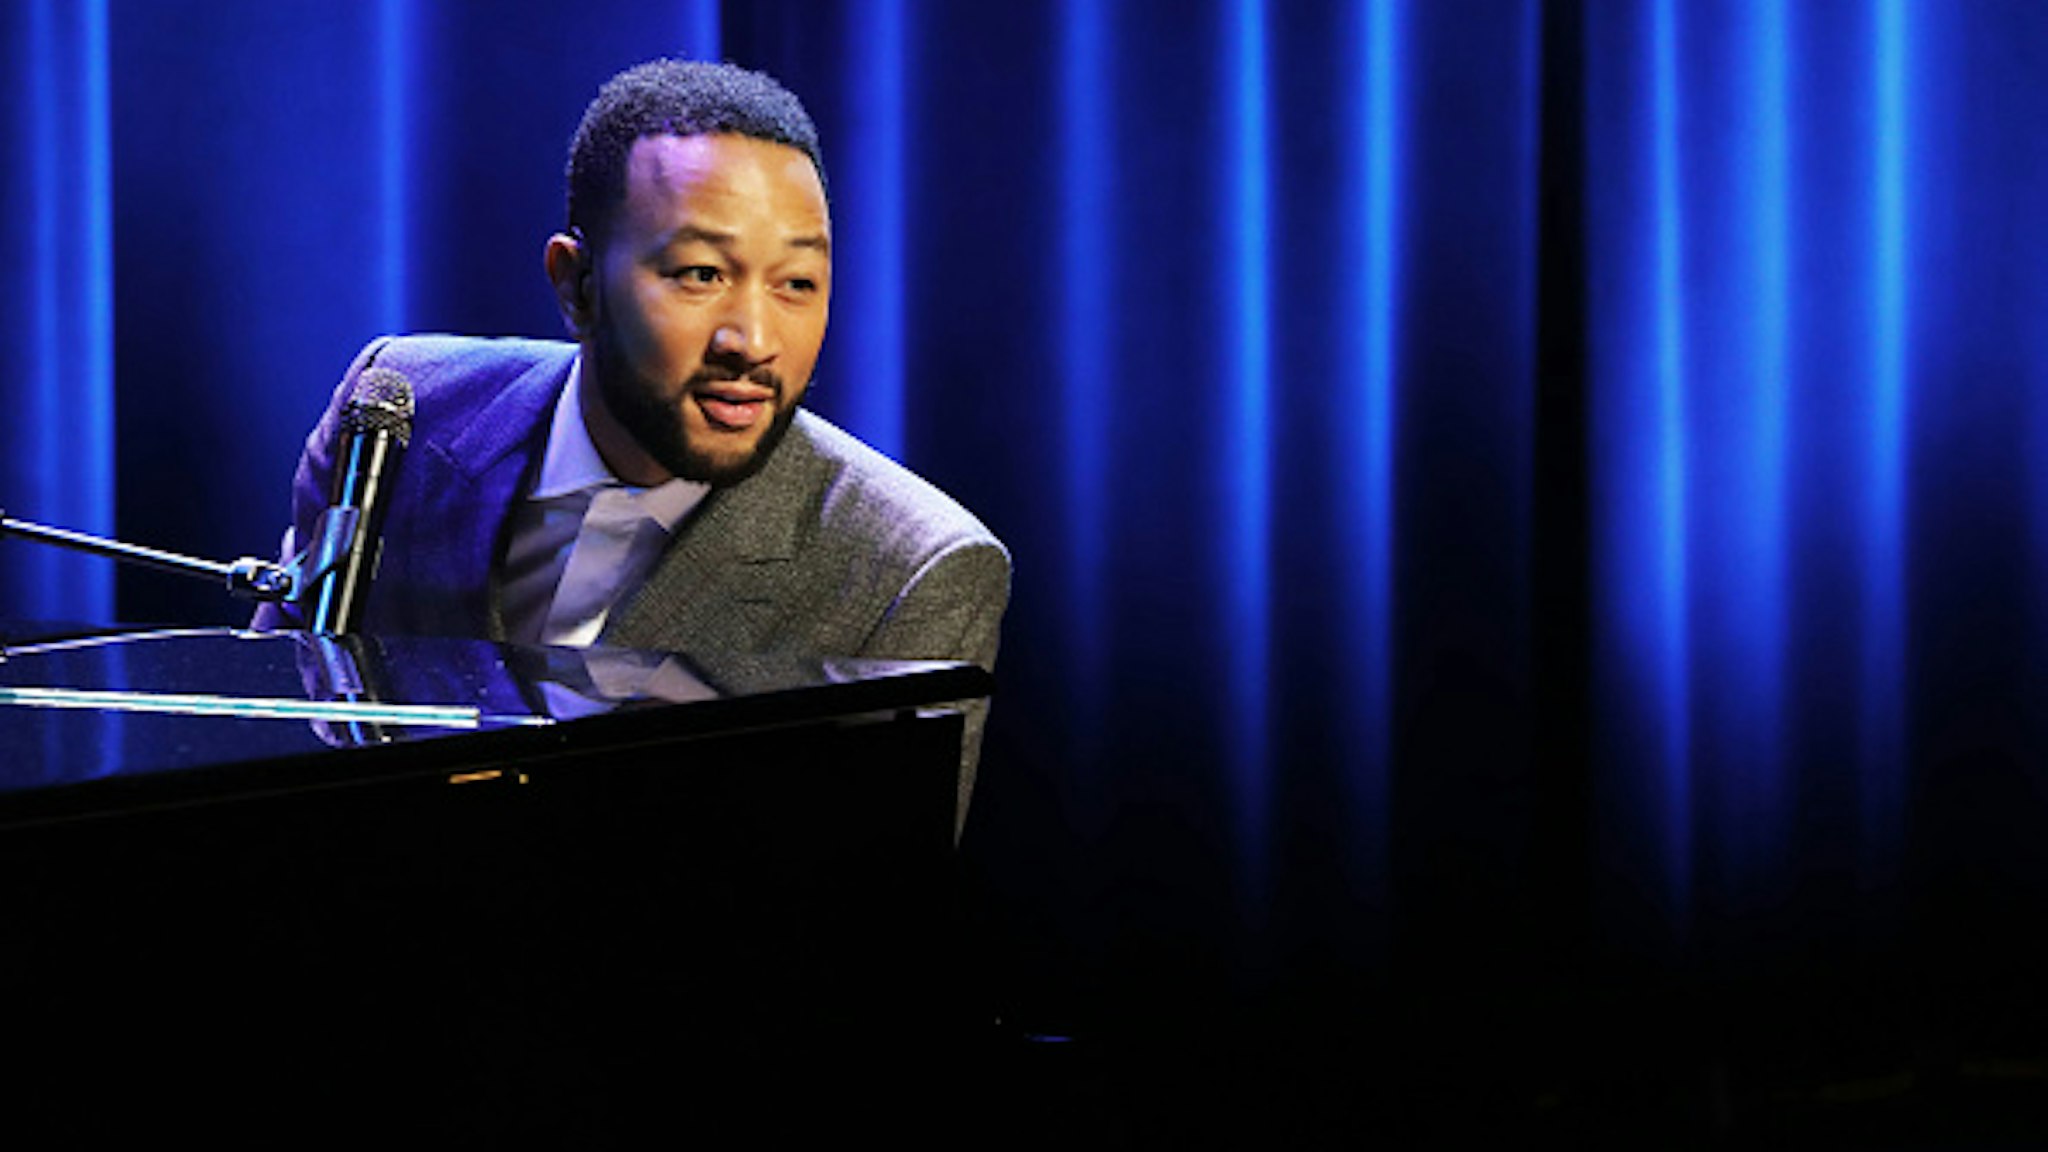 ORANGEBURG, SOUTH CAROLINA - FEBRUARY 26: Musician John Legend performs at a Get Out the Vote Rally with Democratic presidential candidate, Senator Elizabeth Warren (D-MA) at South Carolina State University ahead of South Carolina's primary on February 26, 2020 in Orangeburg, South Carolina. South Carolinians go to the polls on Saturday for what will be a crucial test of African American support for the Democratic candidates for president.